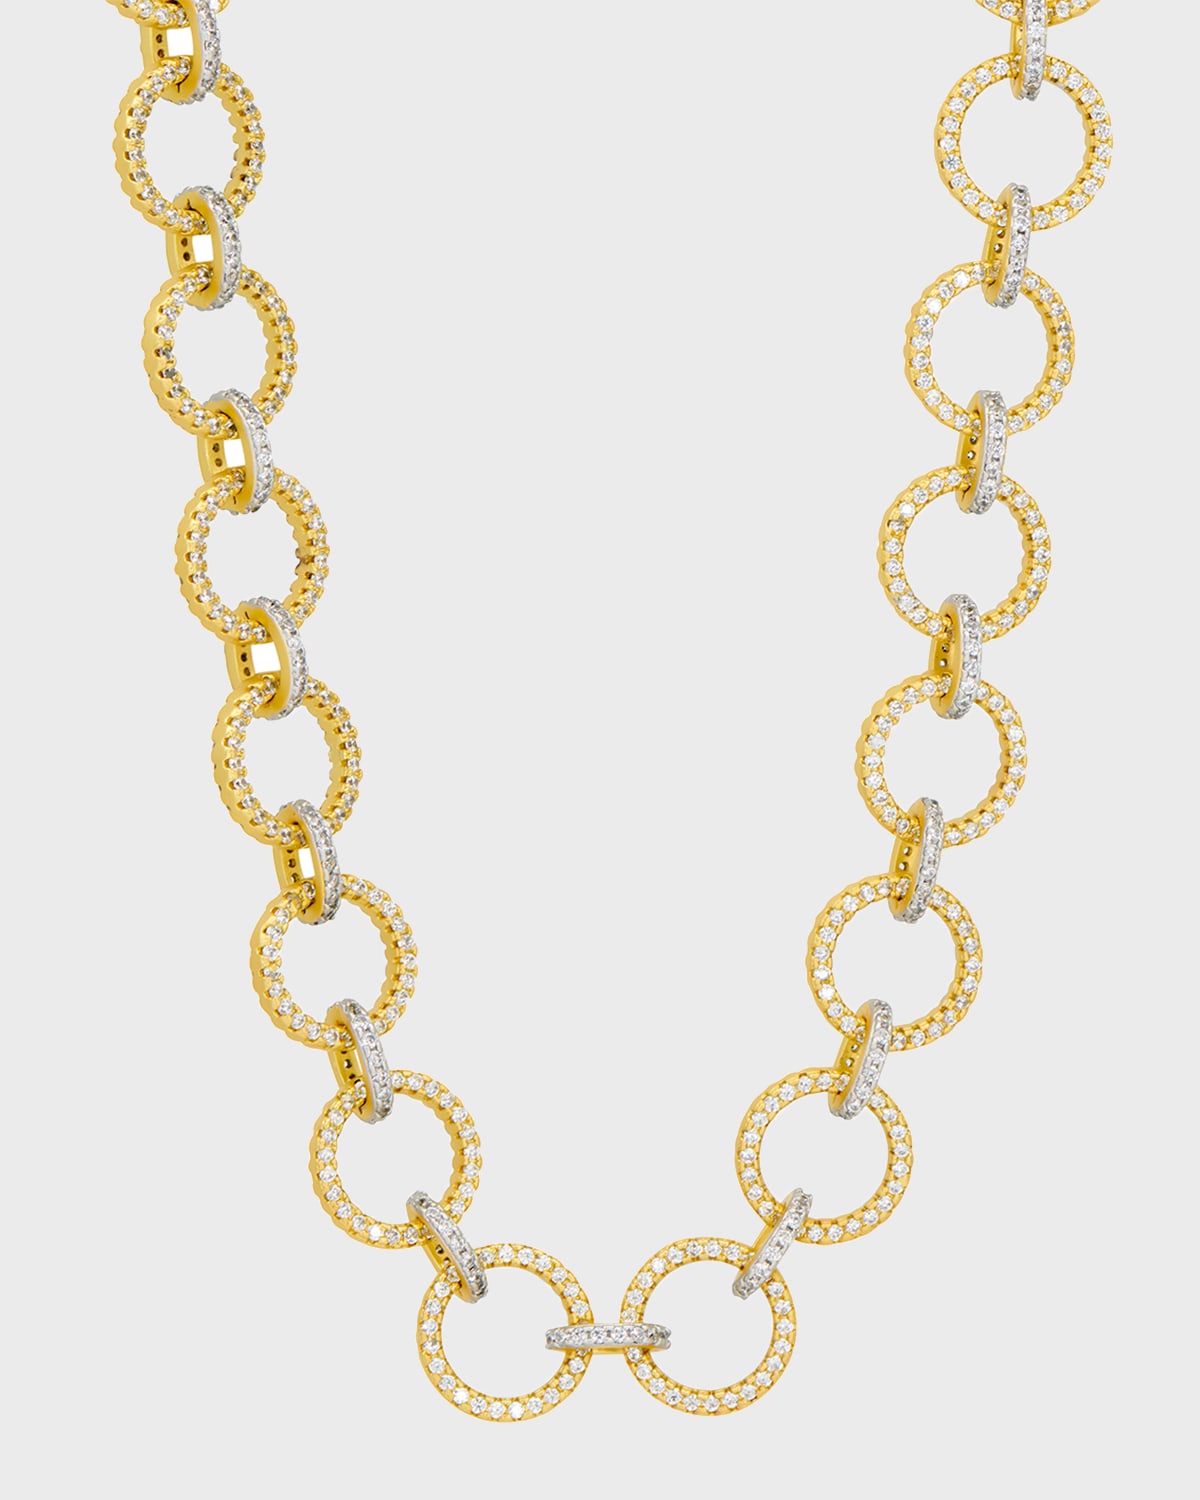 Freida Rothman Chains of Armor Link Necklace